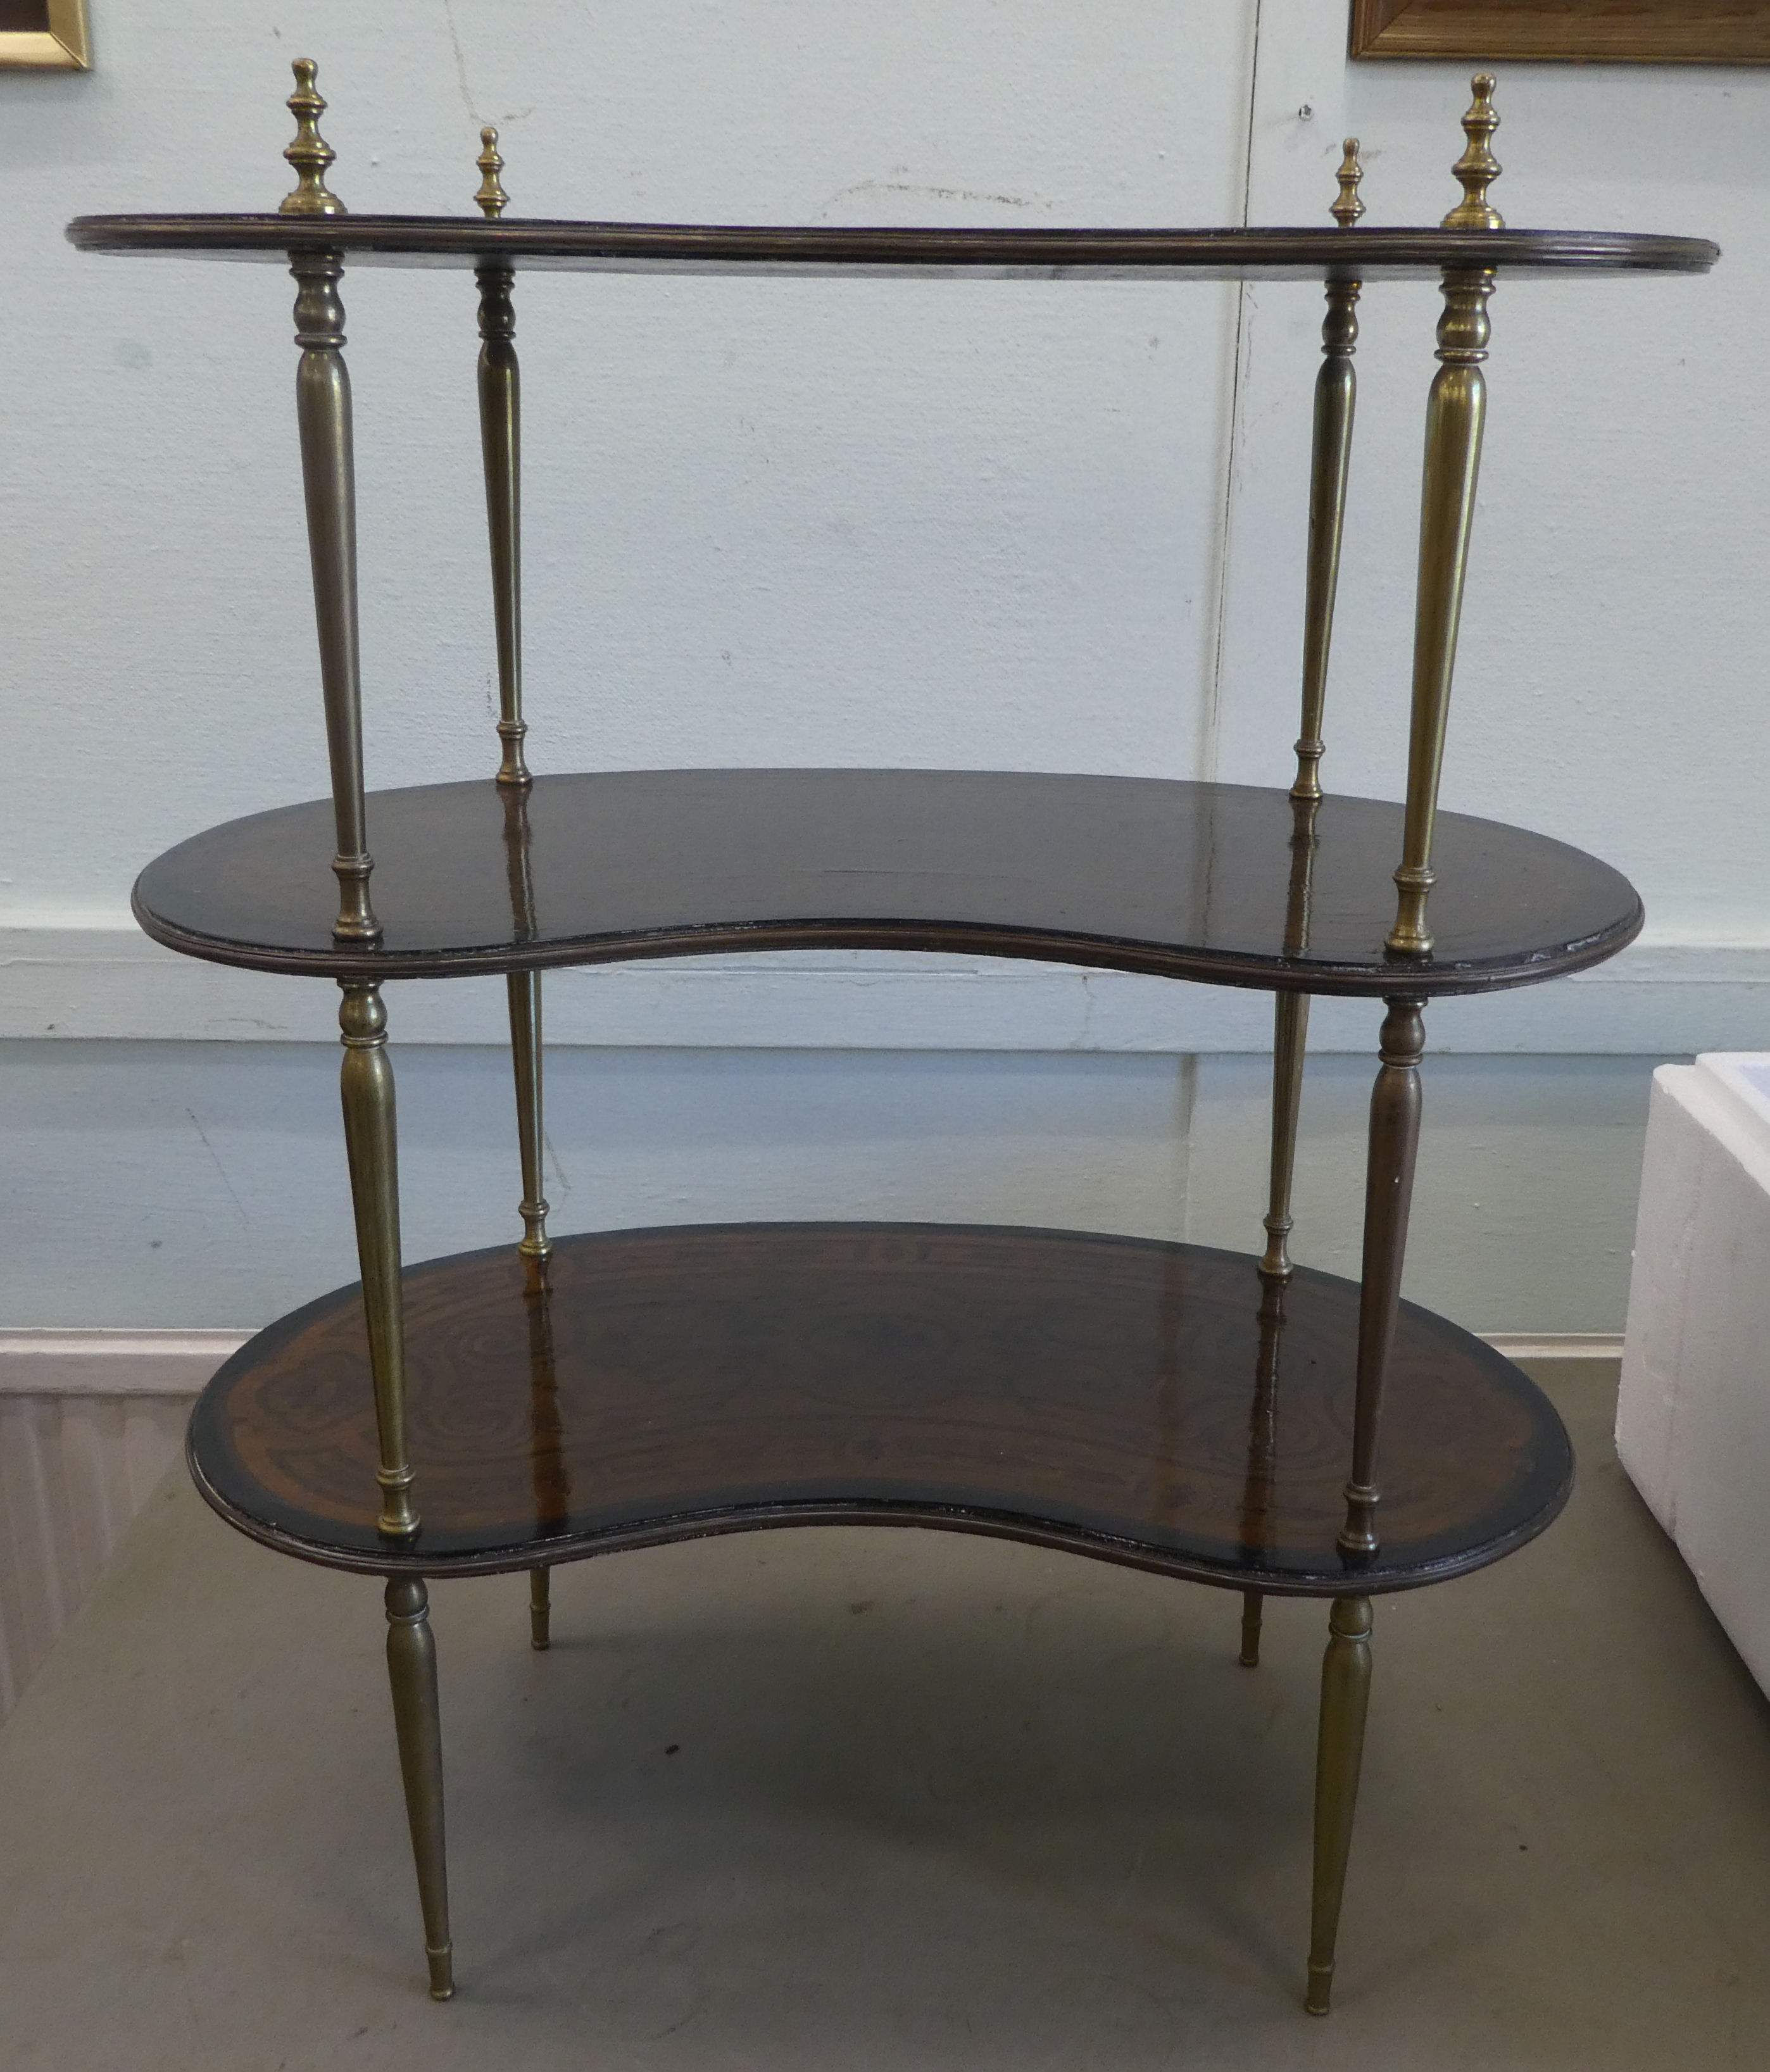 An early 20thC overpainted mahogany kidney shaped three tier whatnot, elevated on tapered, brass